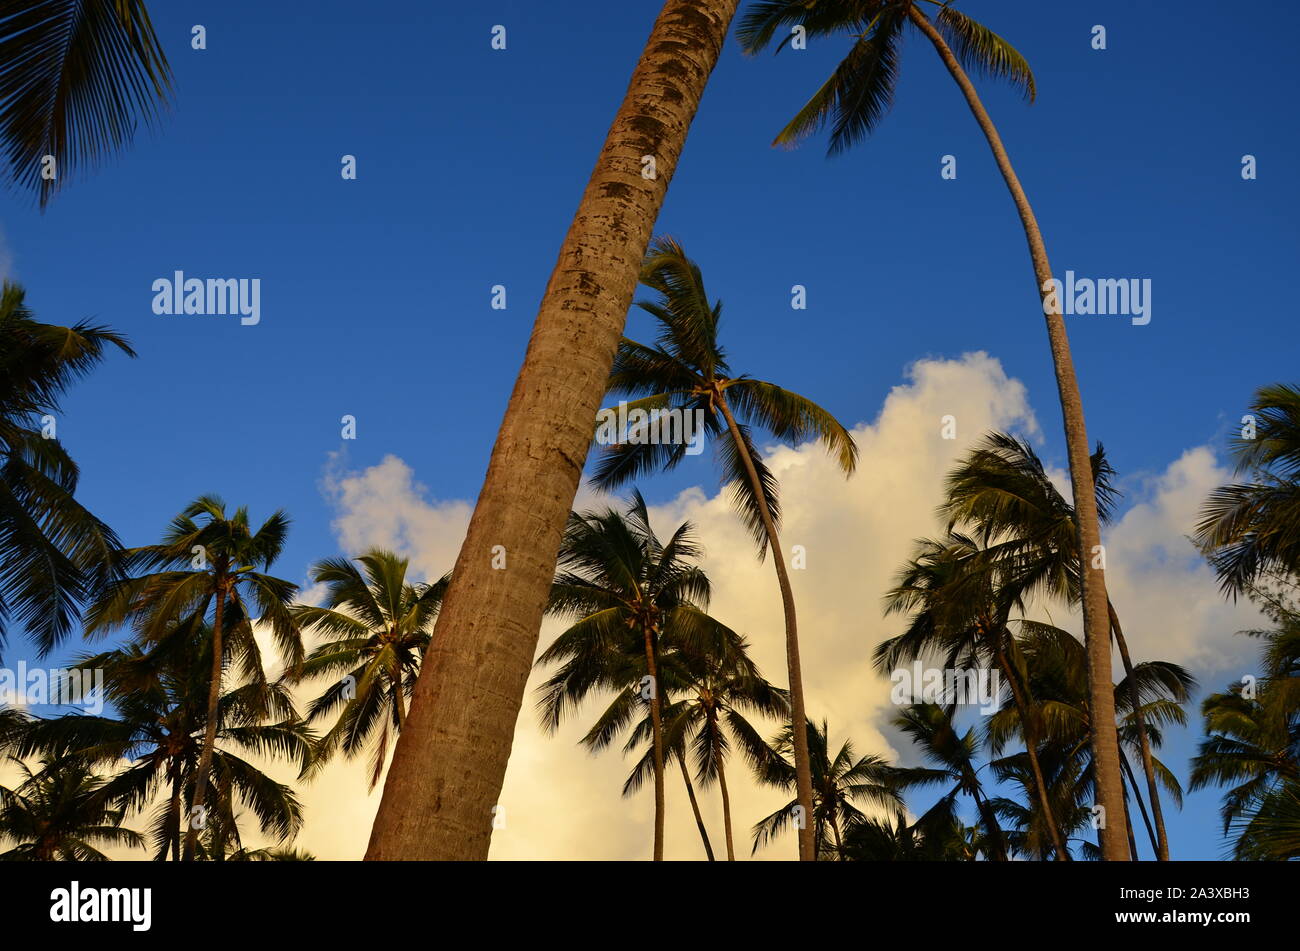 The view of the palm trees on tropical island Stock Photo